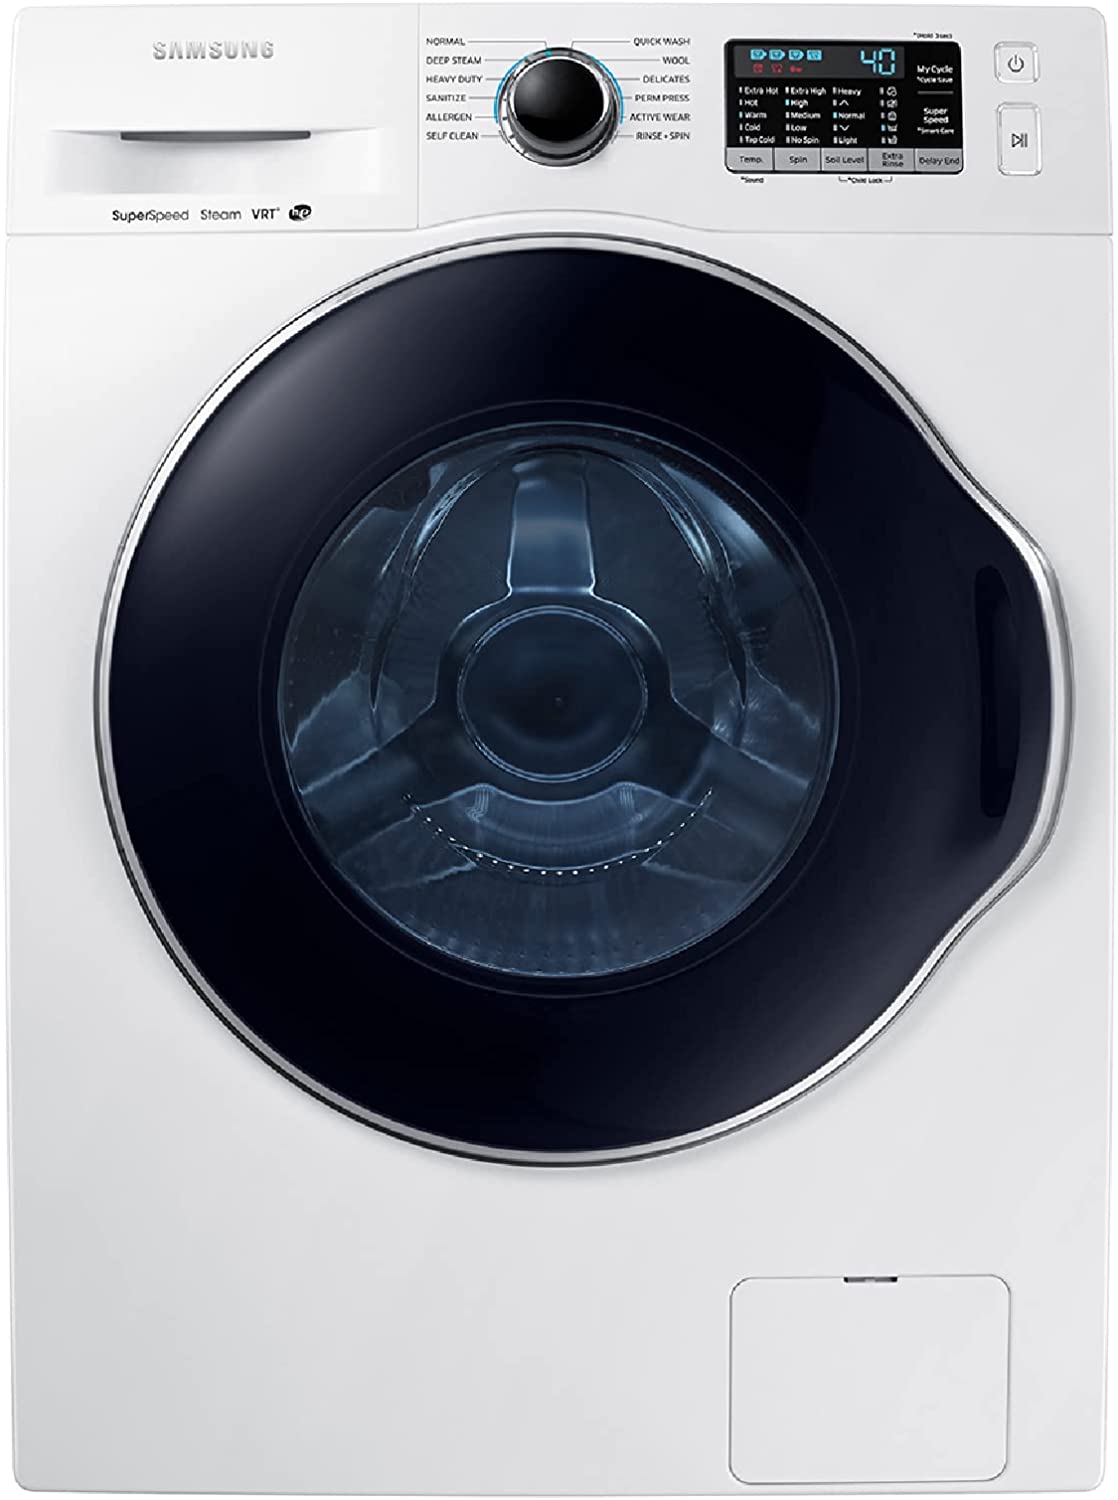 SAMSUNG 2.2 Cu Ft Compact Front Load Washer